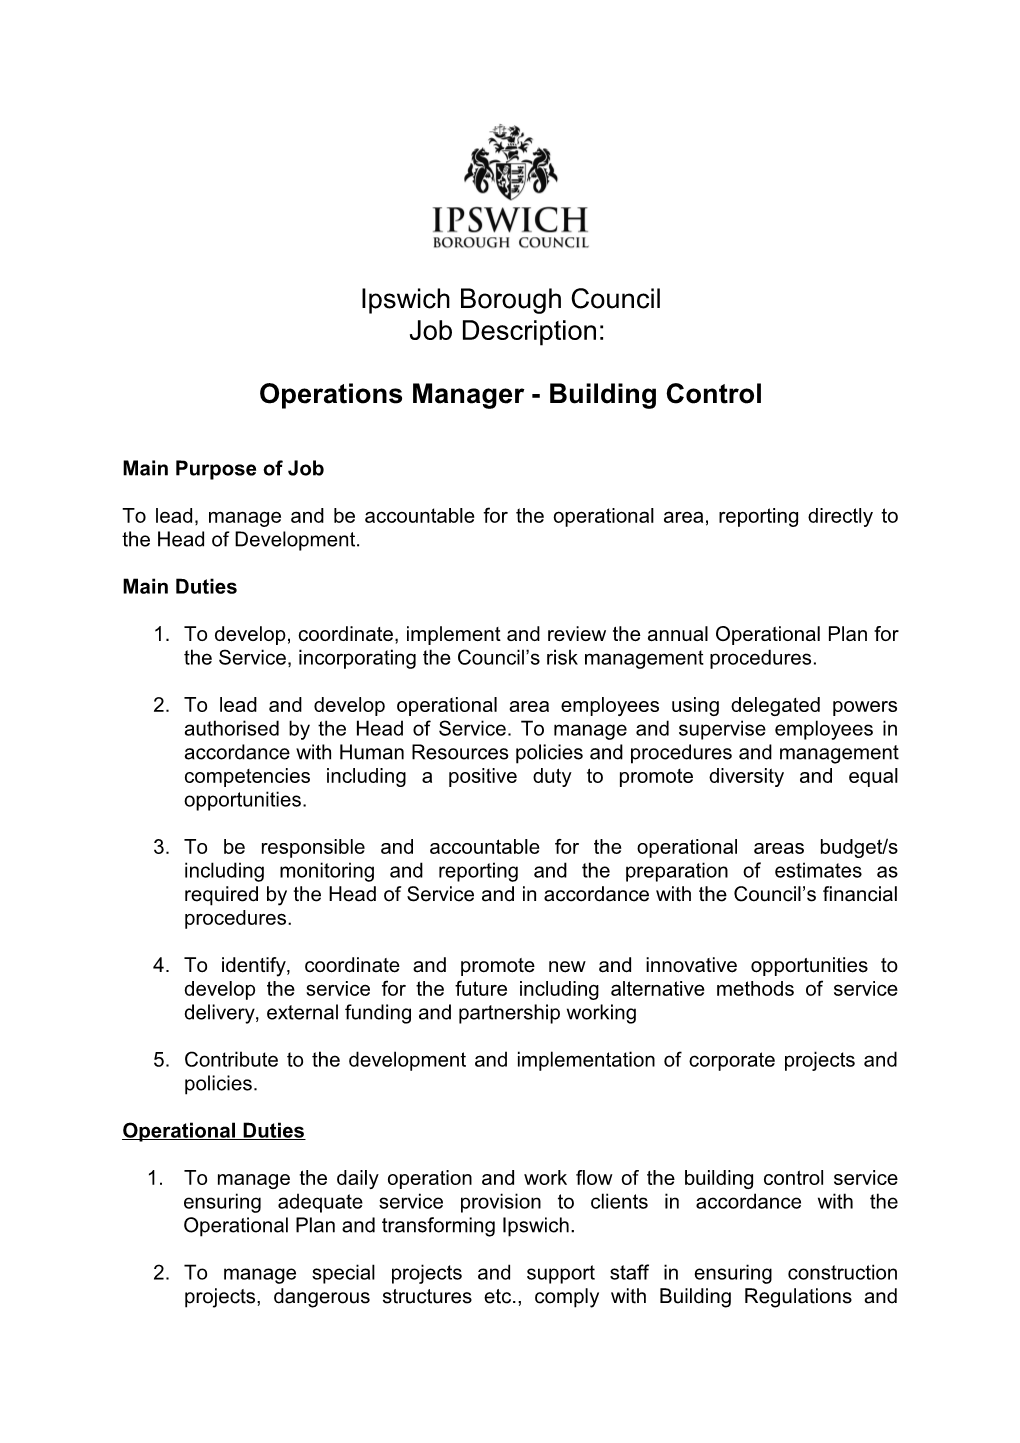 Operations Manager - Building Control